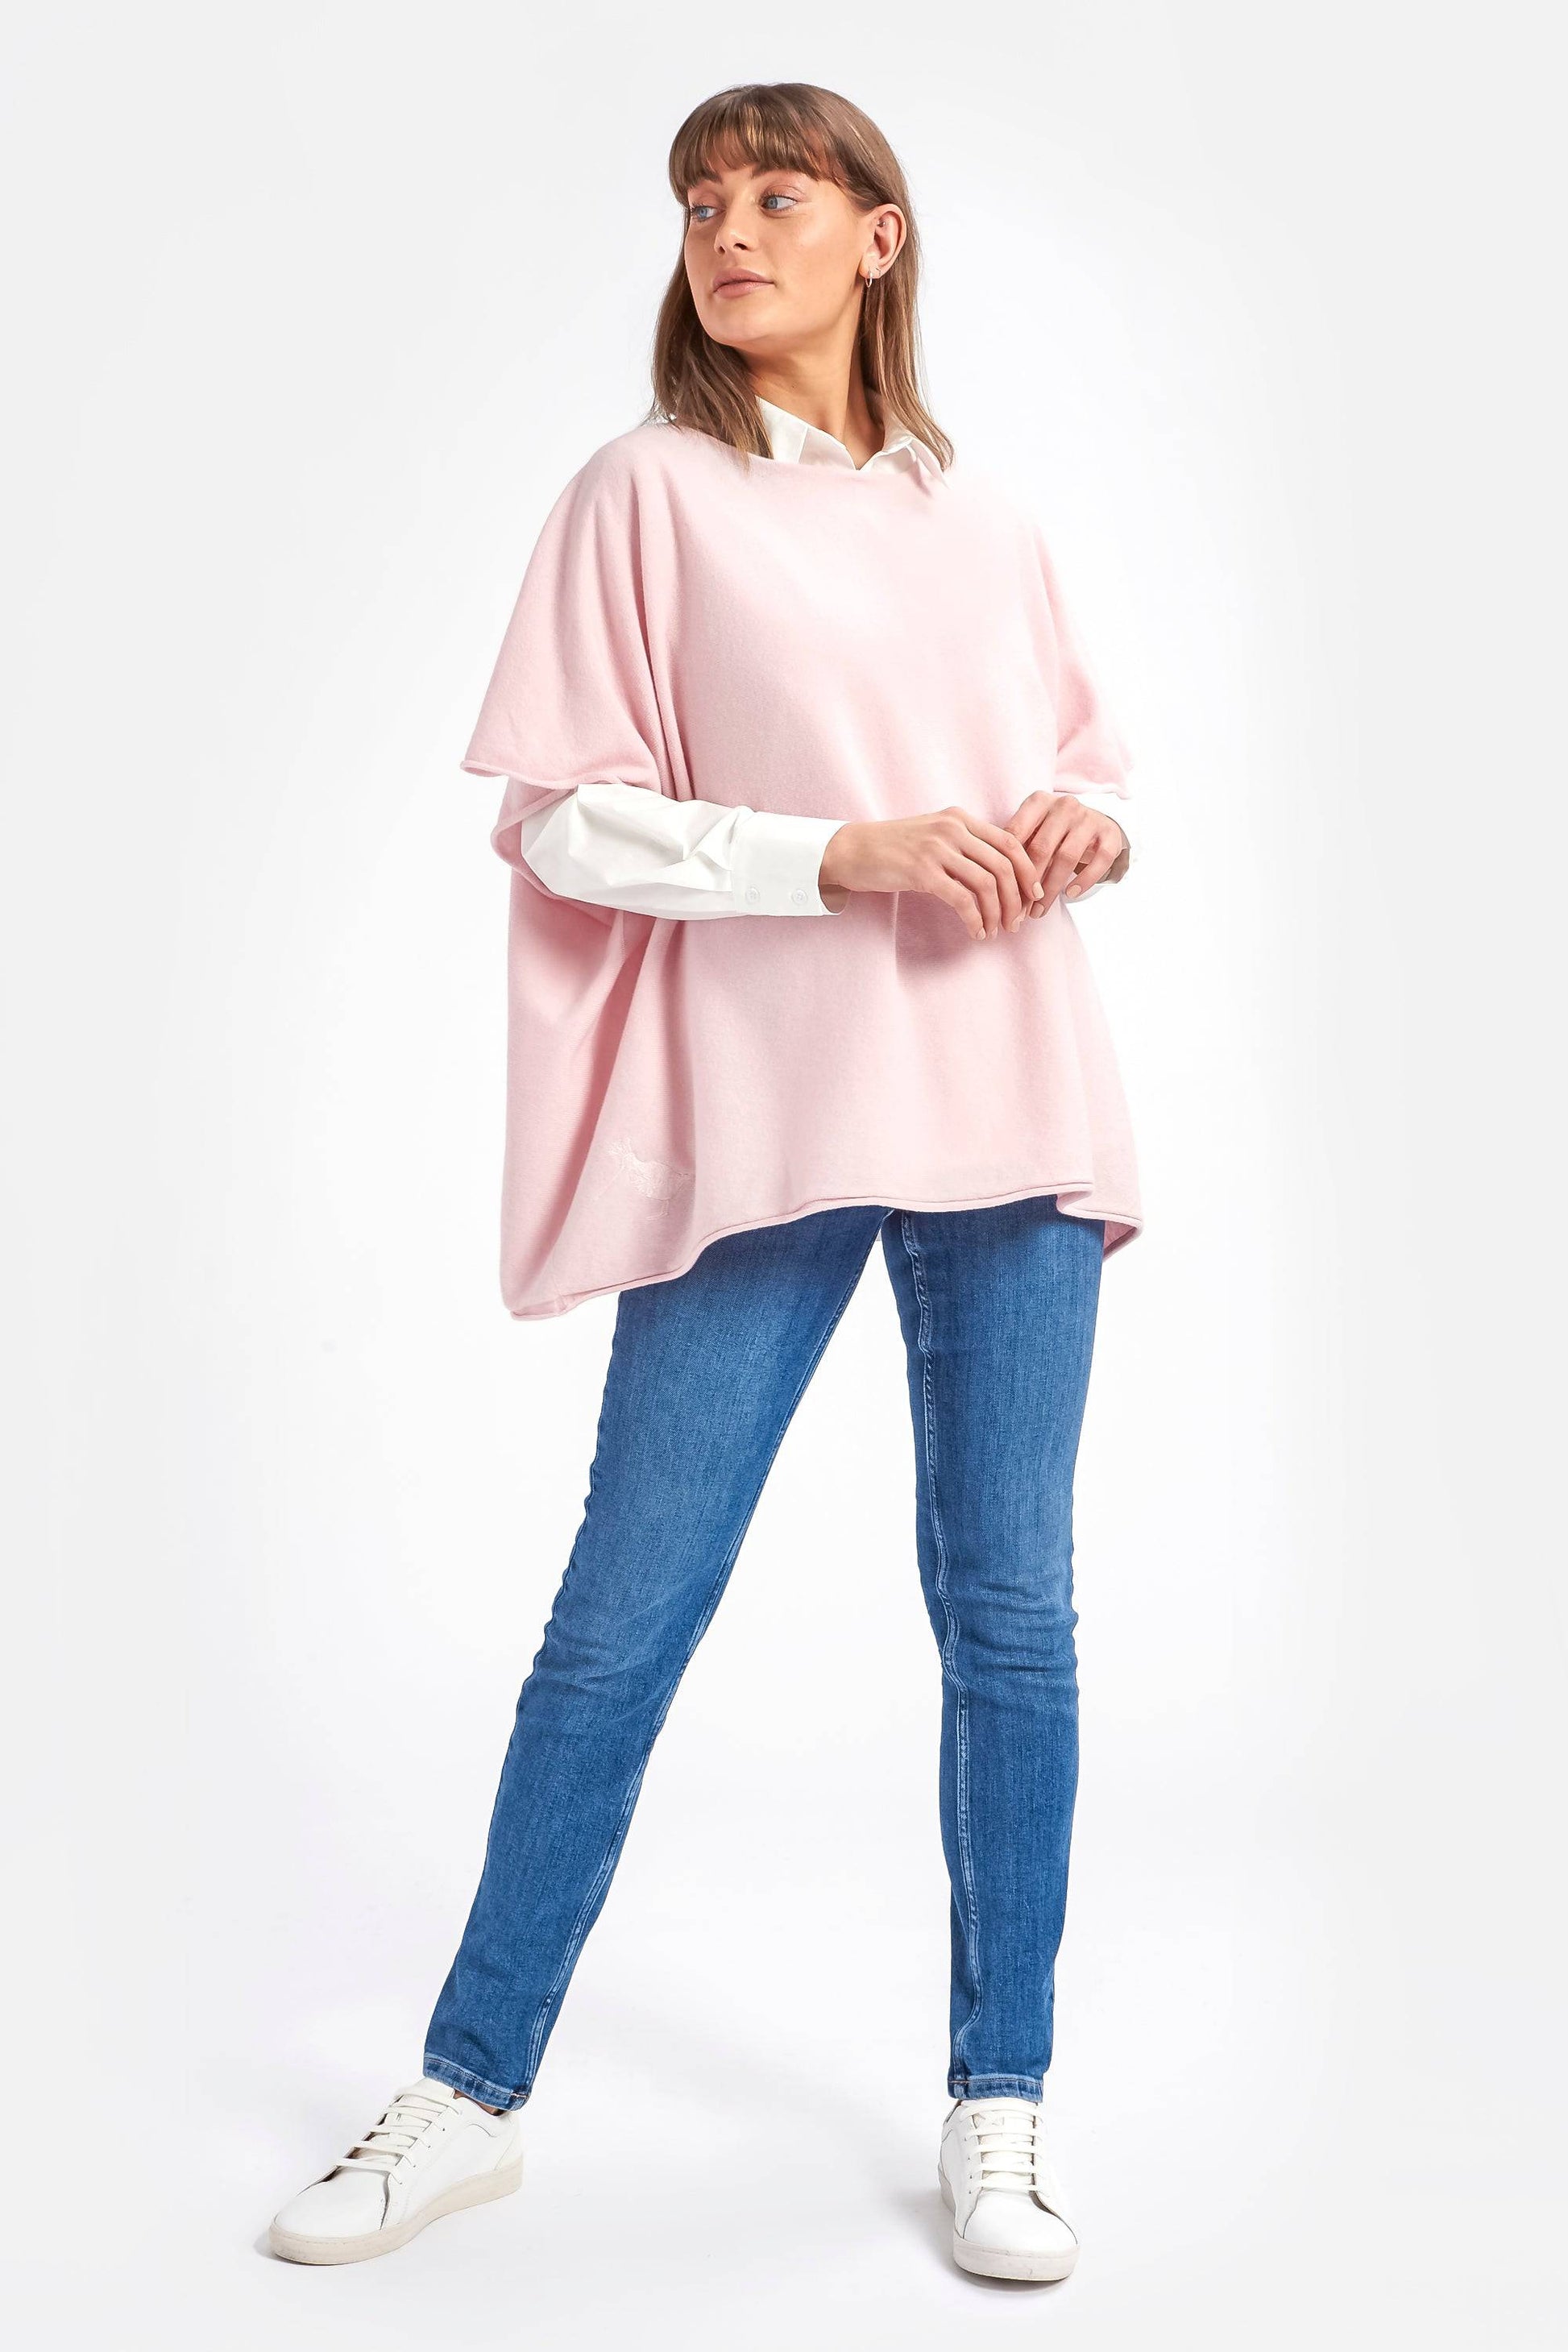 Cashmere & Merino Wool Boat Neck Poncho in Pale Pink By Woodcock & Cavendish for sale - Woodcock and Cavendish